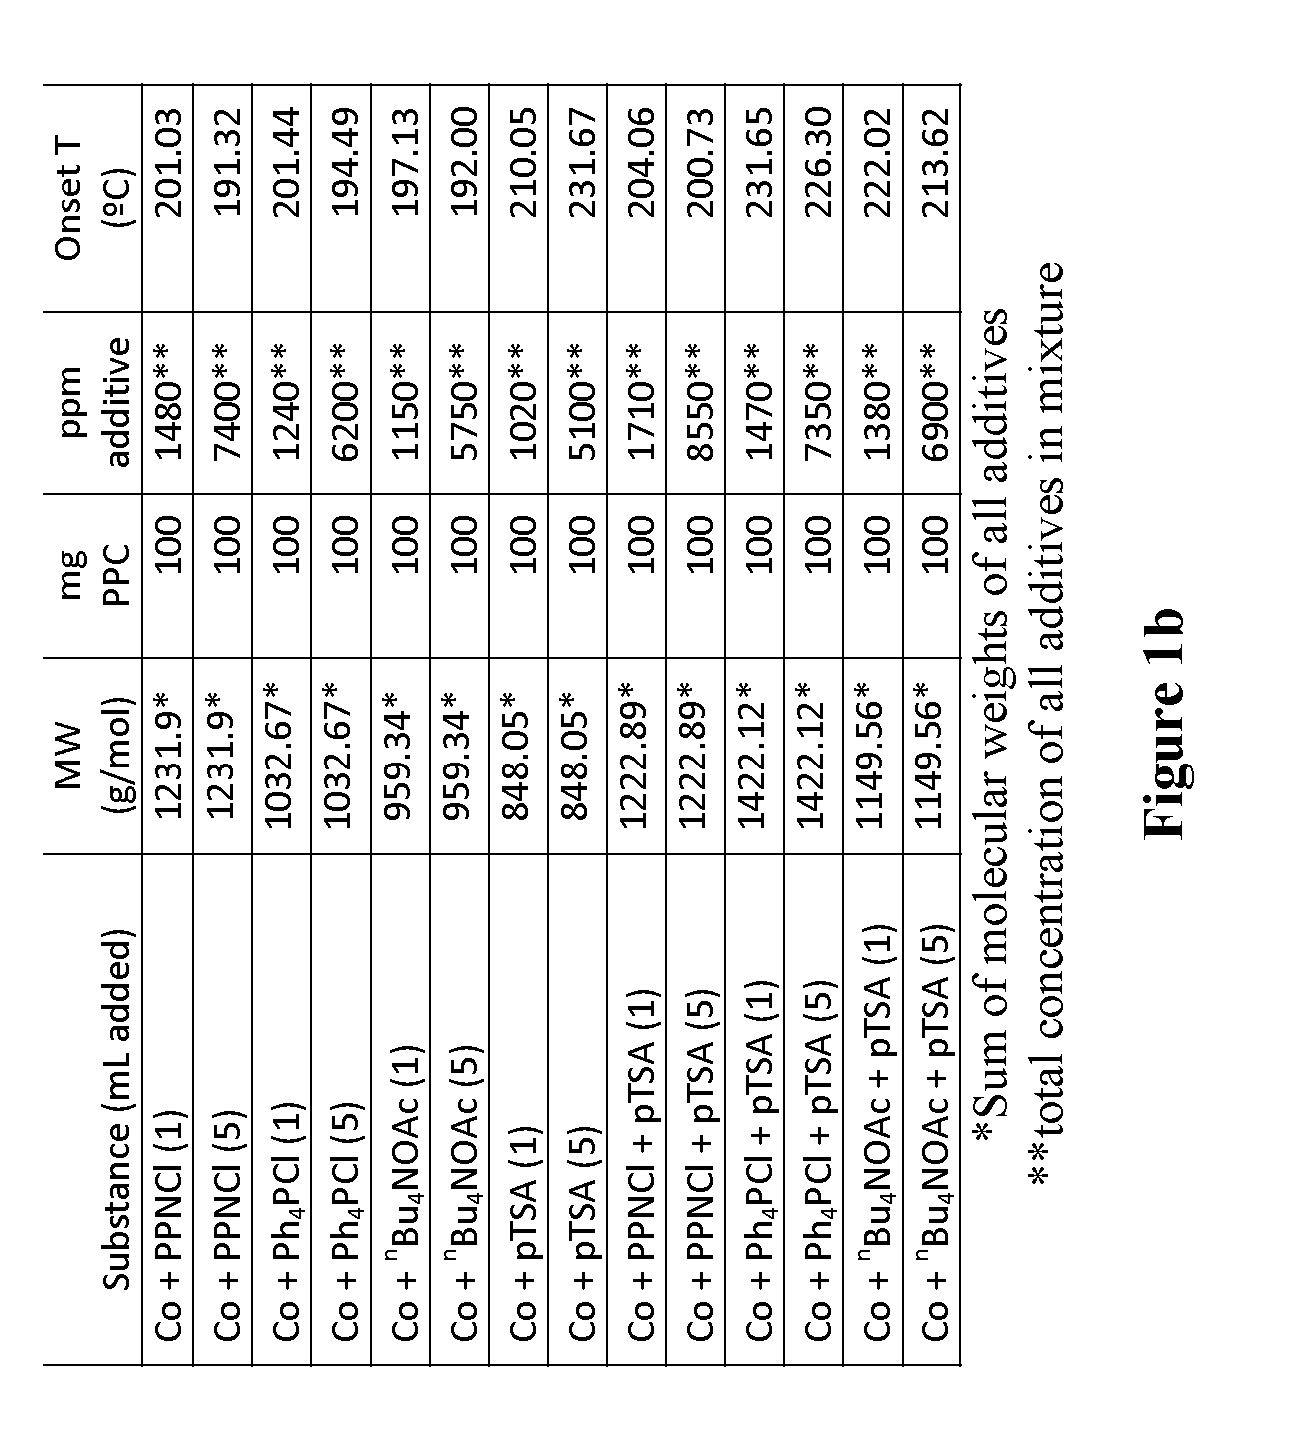 Tunable polymer compositions